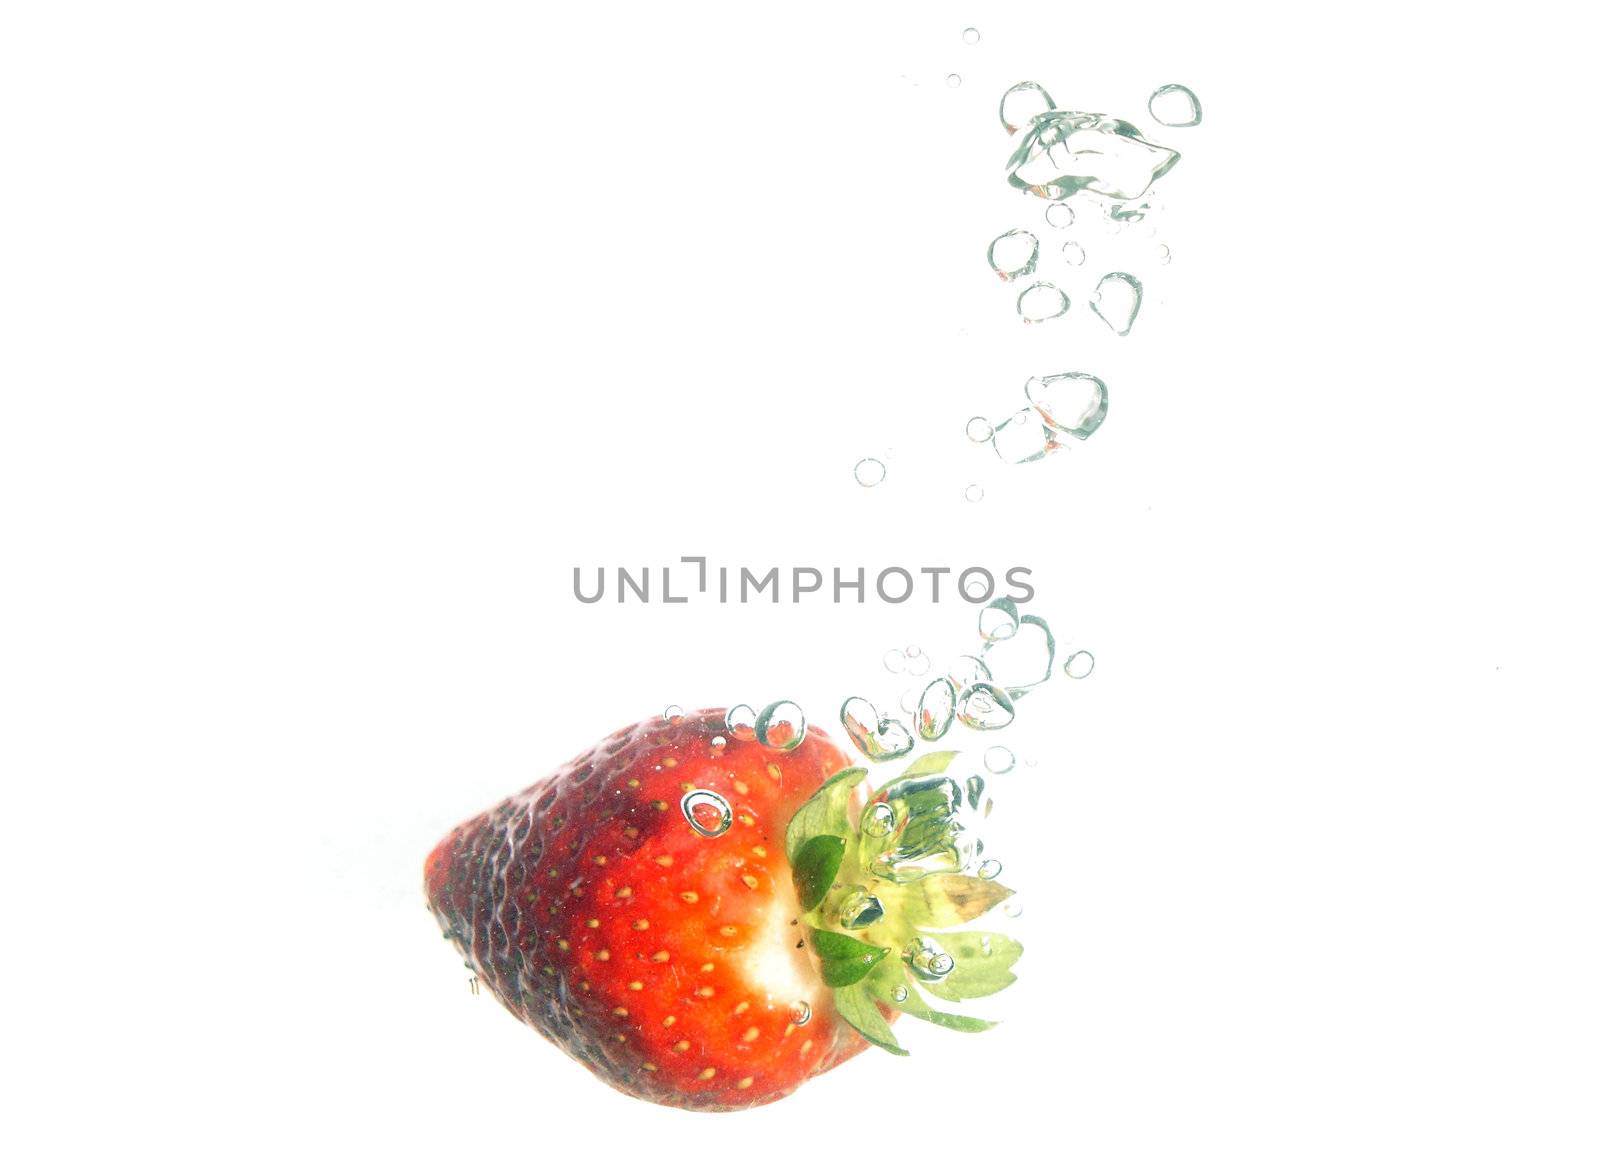  Splash of fresh strawberry to water with bubbles of air